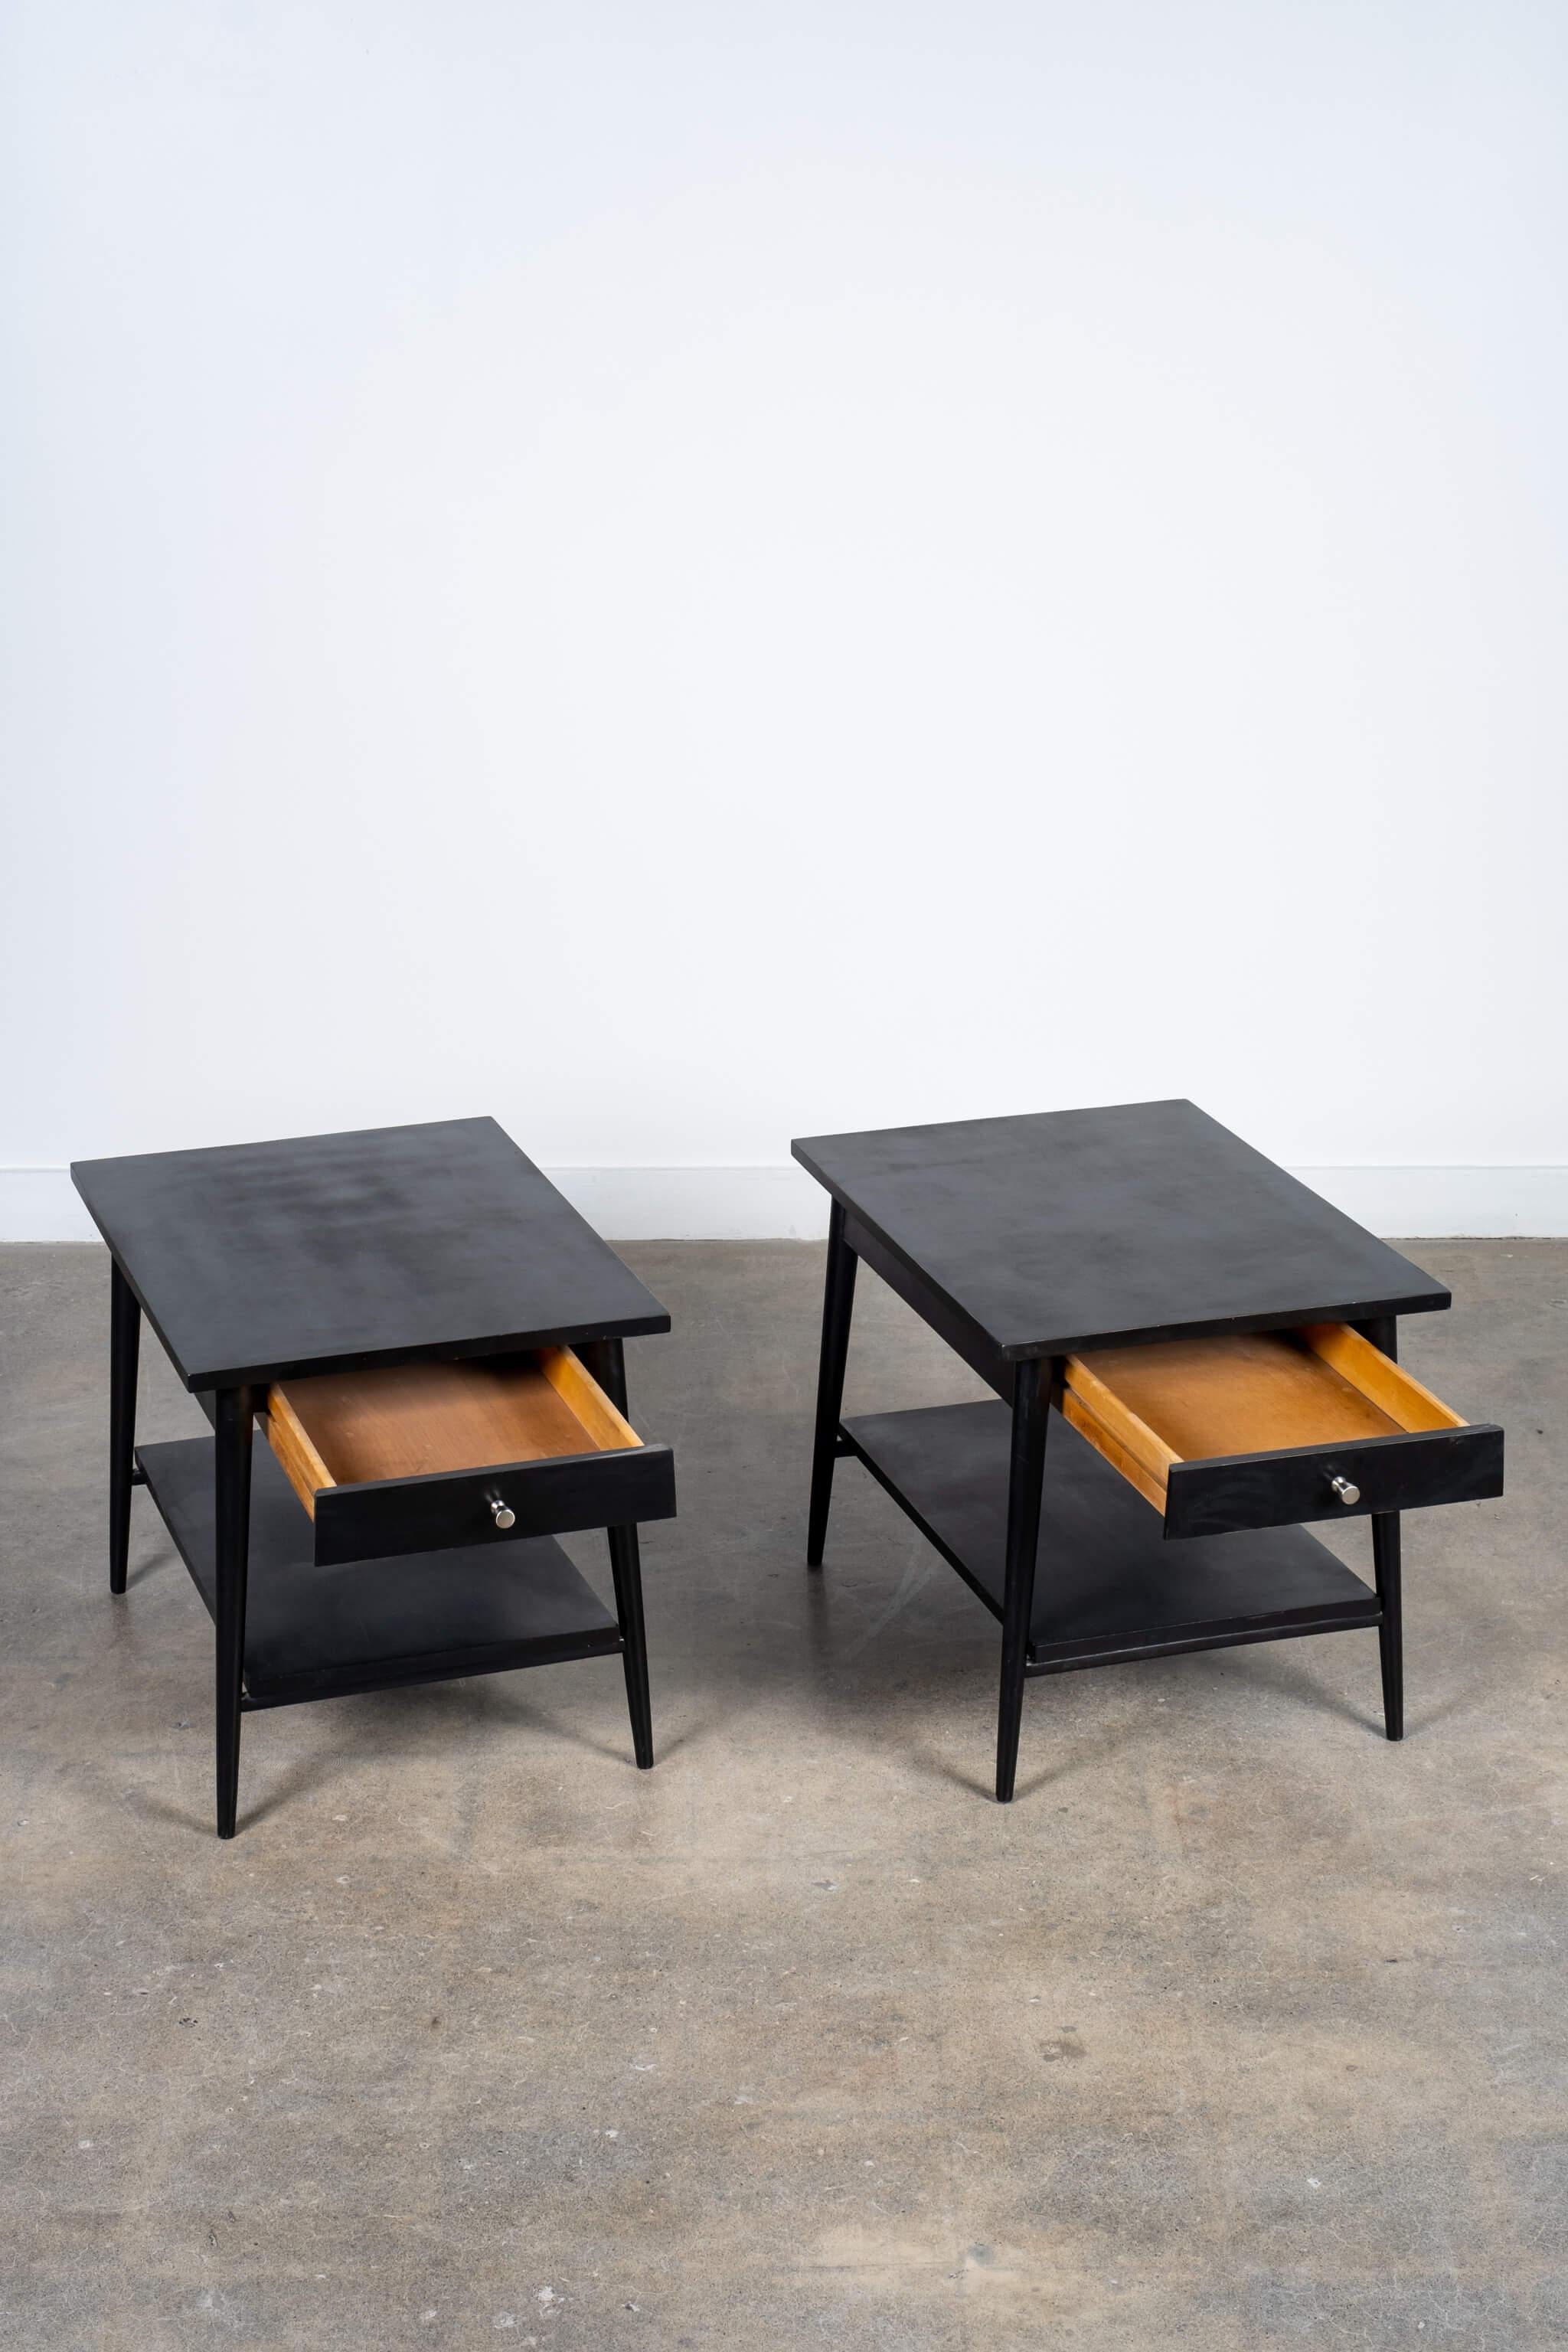 American Pair of #1587 Side Tables by Paul McCobb, 1960s For Sale